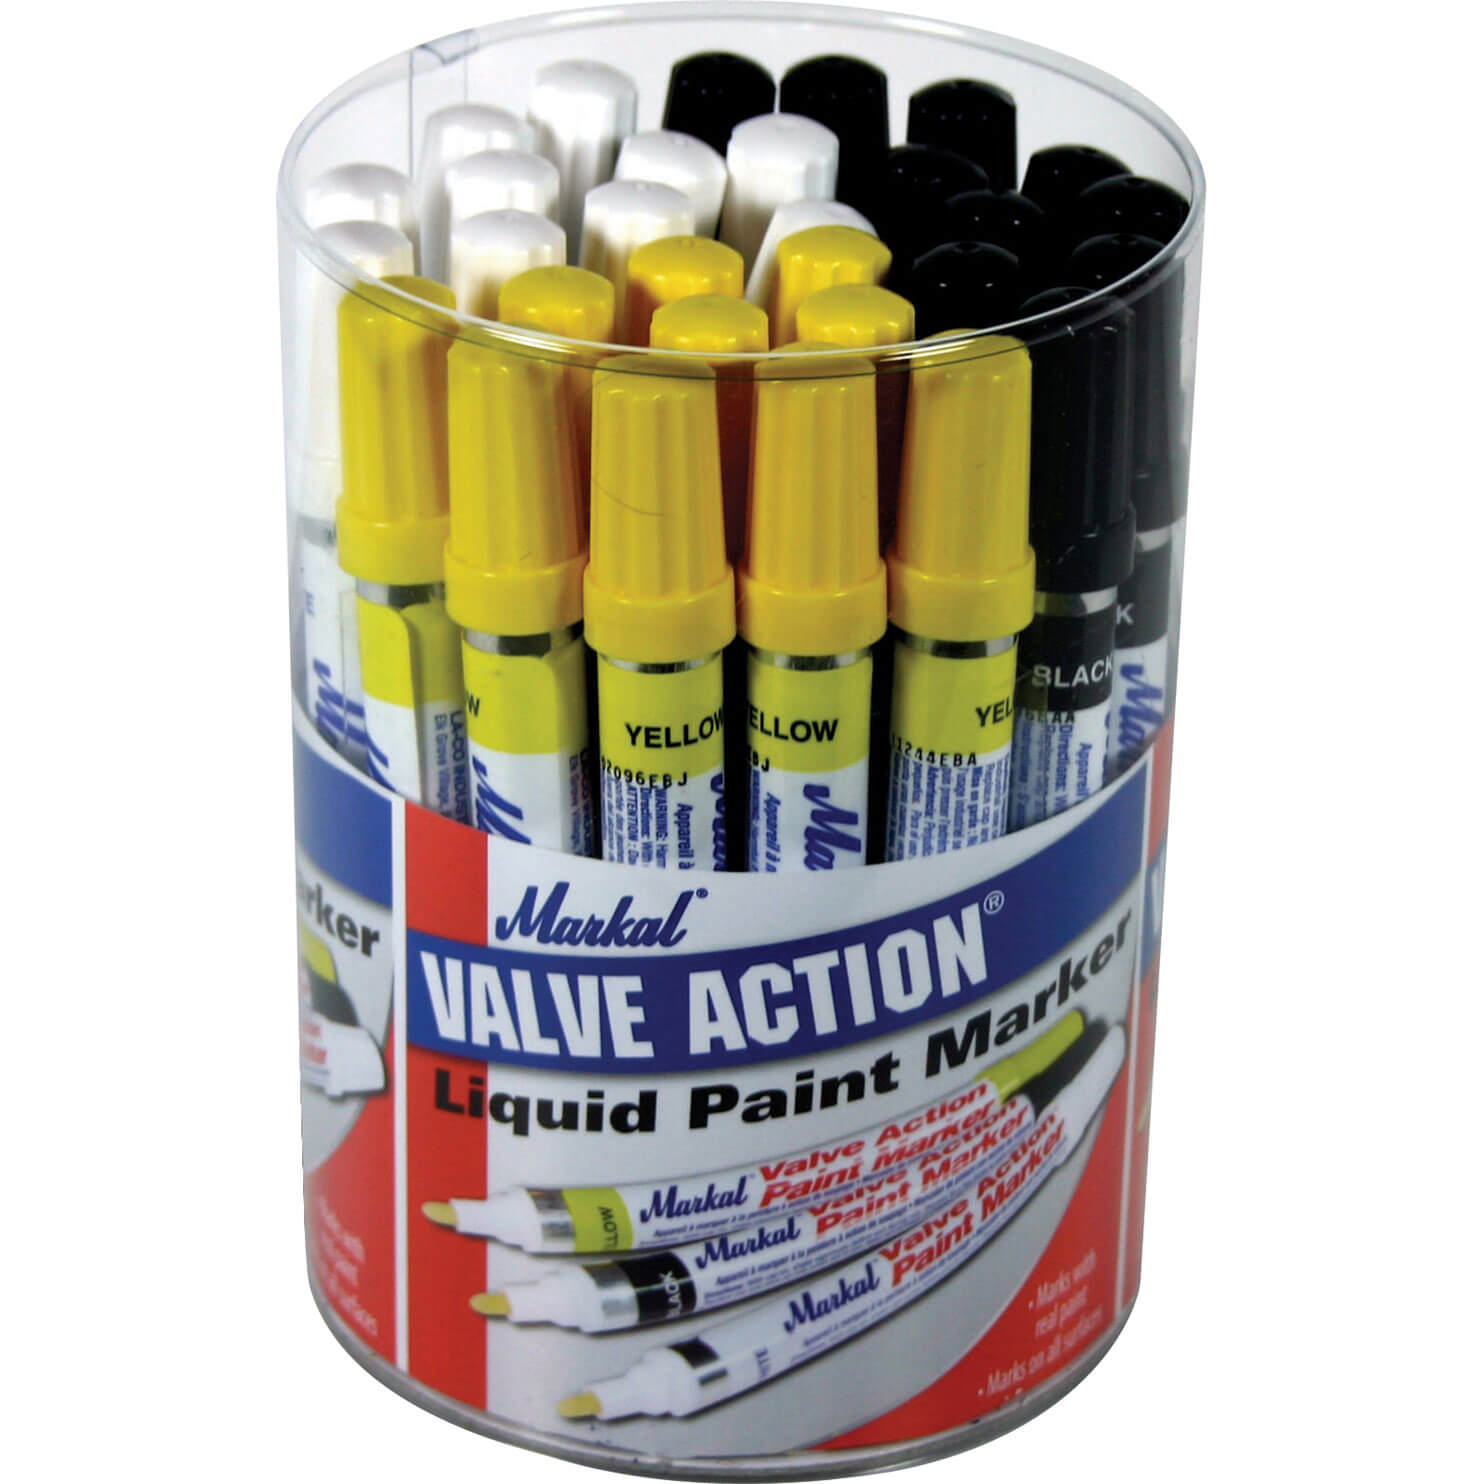 Image of Markal Valve Action Paint Marker Pen Tub Assorted Pack of 24